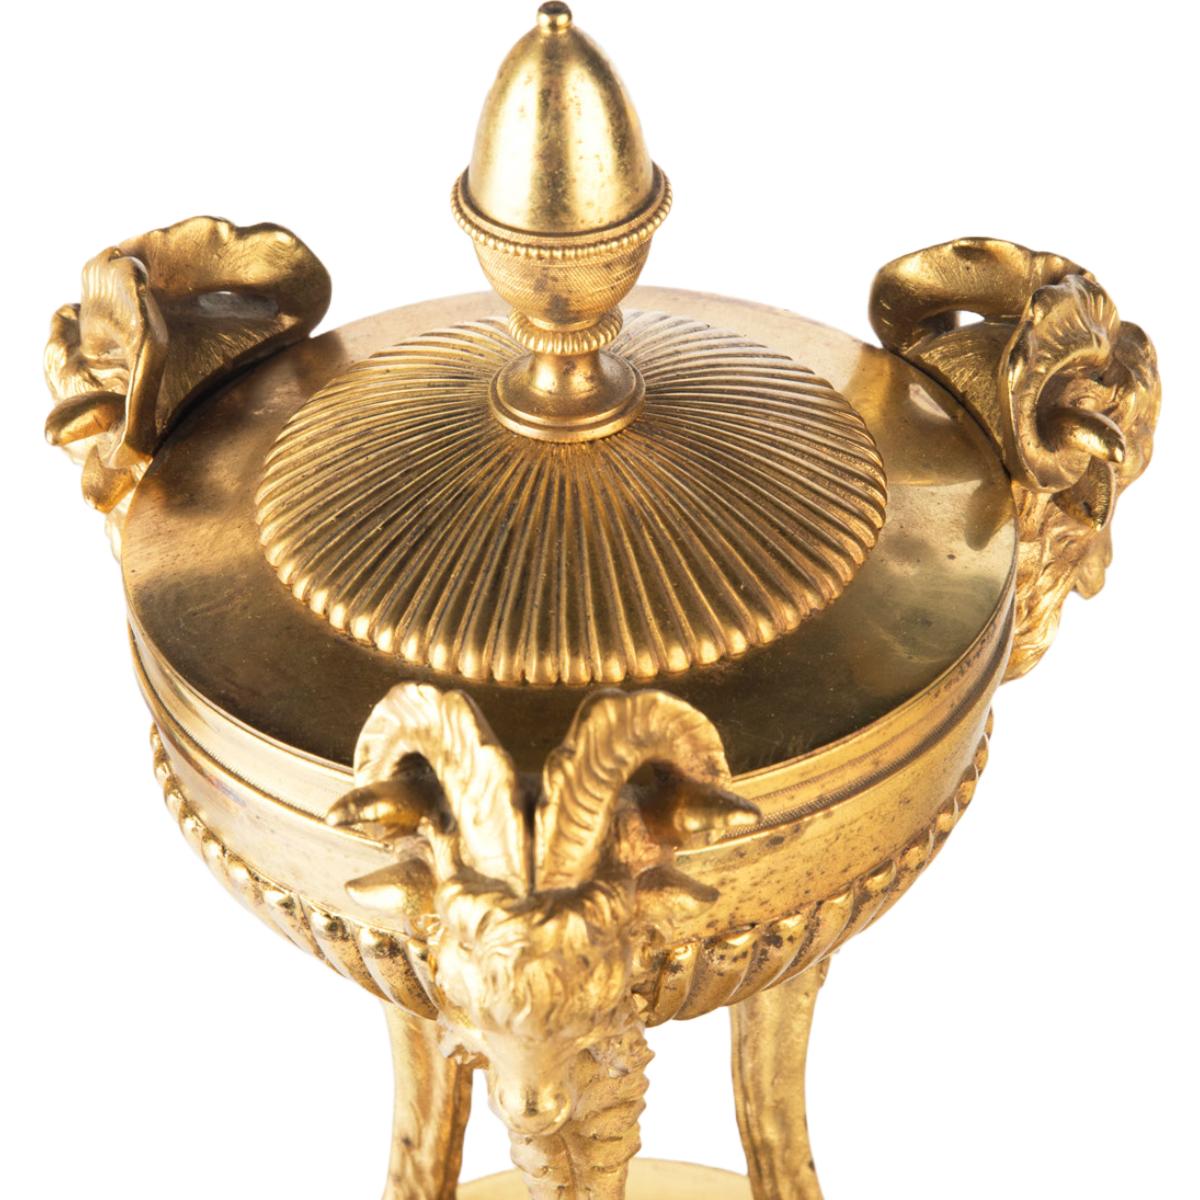 A pair of Regency classical gilt bronze vases, each in the form of a shallow gadrooned bowl with an acorn finial supported by three goat-headed terms with cloven hooves, raised on a short black and white marble column set upon a gilt bronze base. 